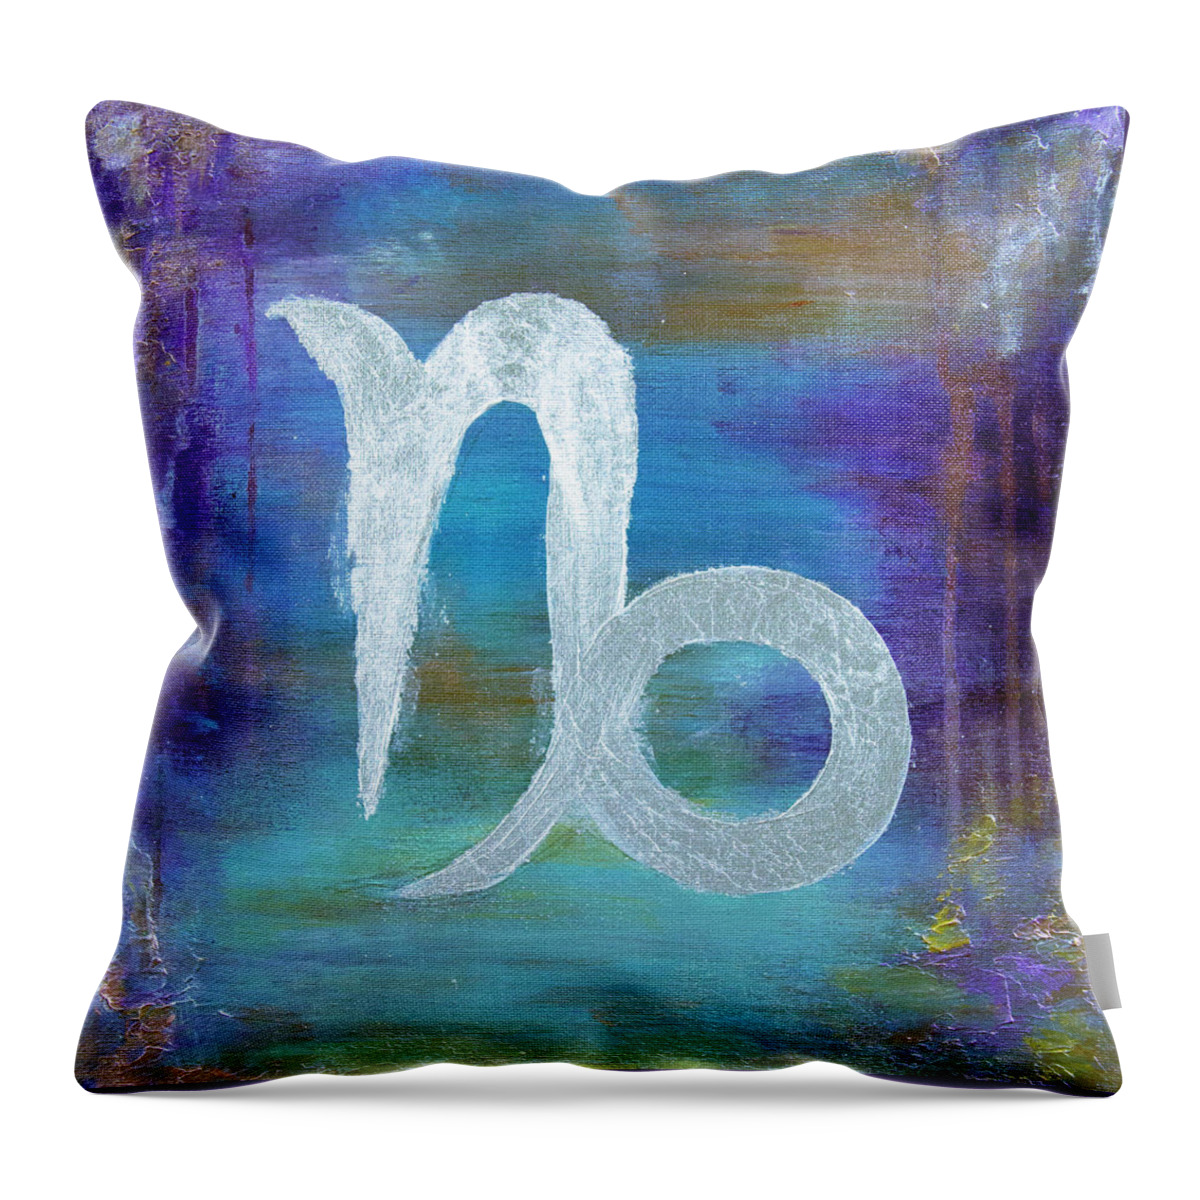 Acrylic Throw Pillow featuring the painting Zodiac Capricorn by Linh Nguyen-Ng